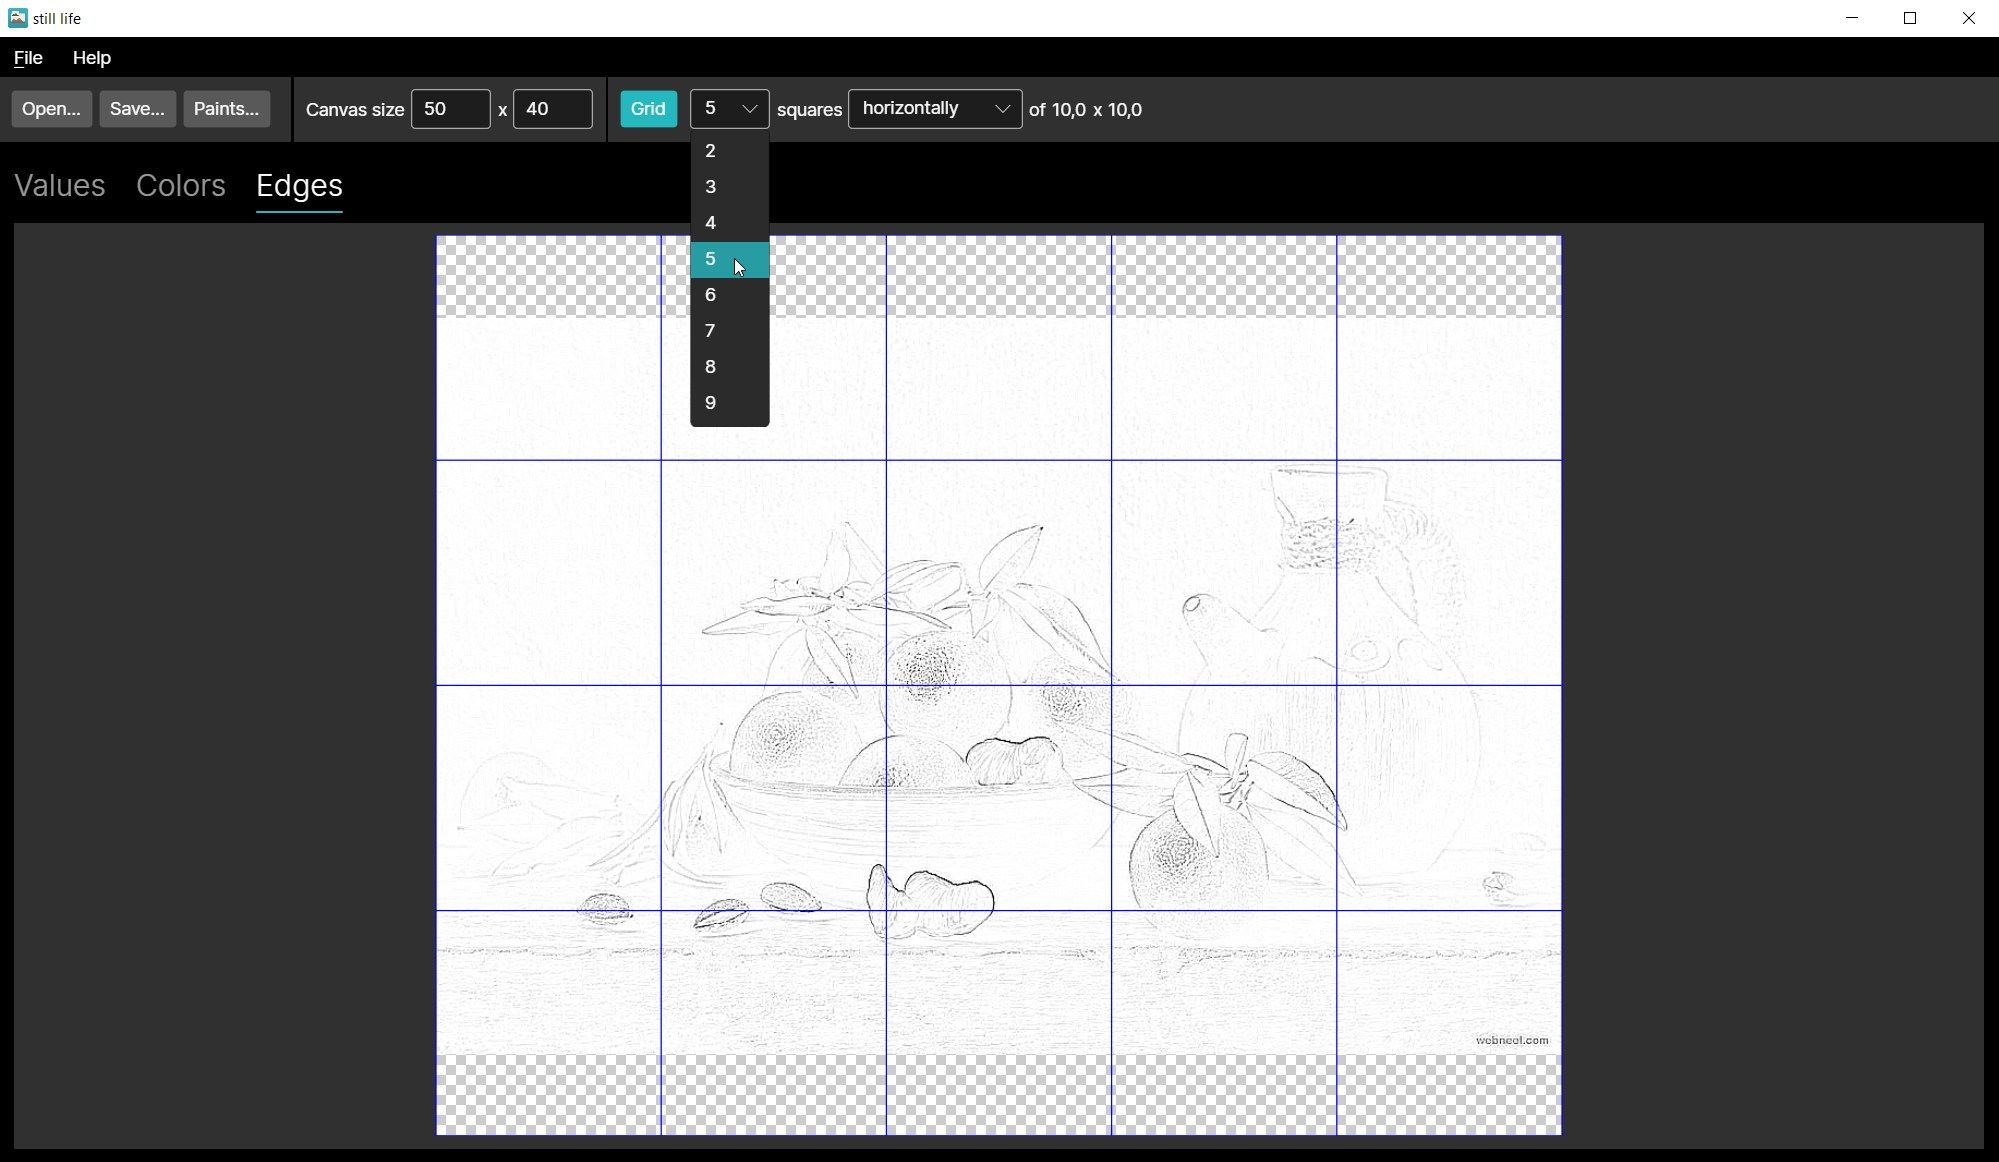 Add a grid for transferring the image to canvas.